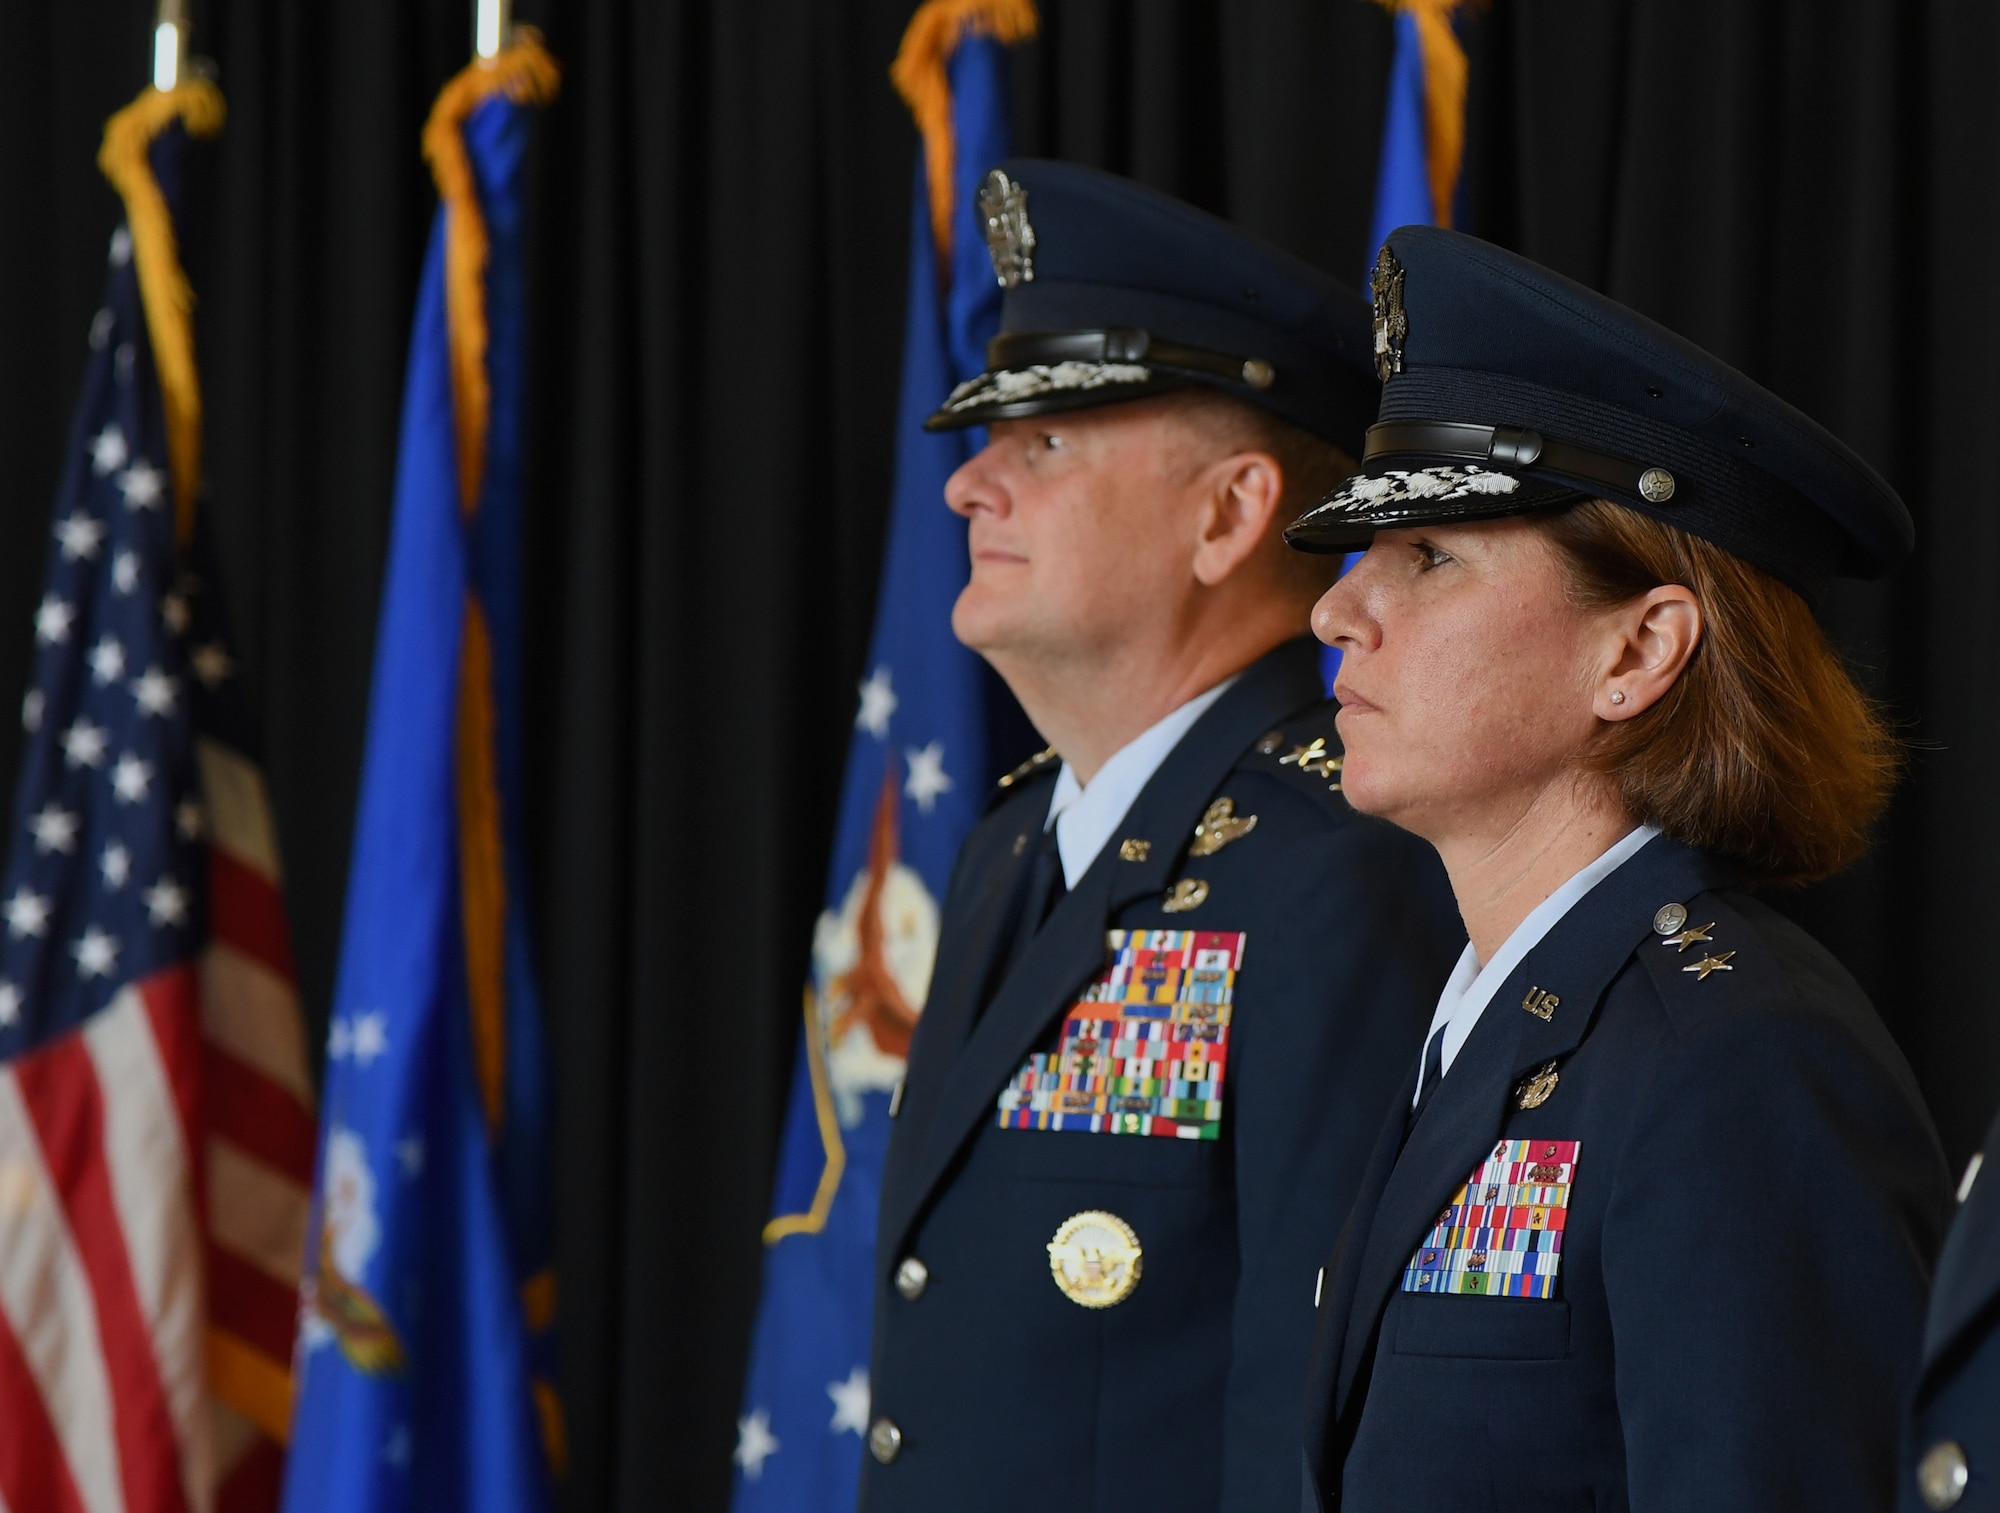 U.S. Air Force Lt. Gen. Brad Webb, commander of Air Education and Training Command, and Maj. Gen. Andrea Tullos, Second Air Force commander, stand at attention during the Second Air Force change of command ceremony on Keesler Air Force Base, Mississippi, Aug. 29, 2019. The ceremony is a symbol of command being exchanged from one commander to the next. Tullos assumed command of the Second Air Force from Maj. Gen. Timothy Leahy. (U.S. Air Force photo by Kemberly Groue)